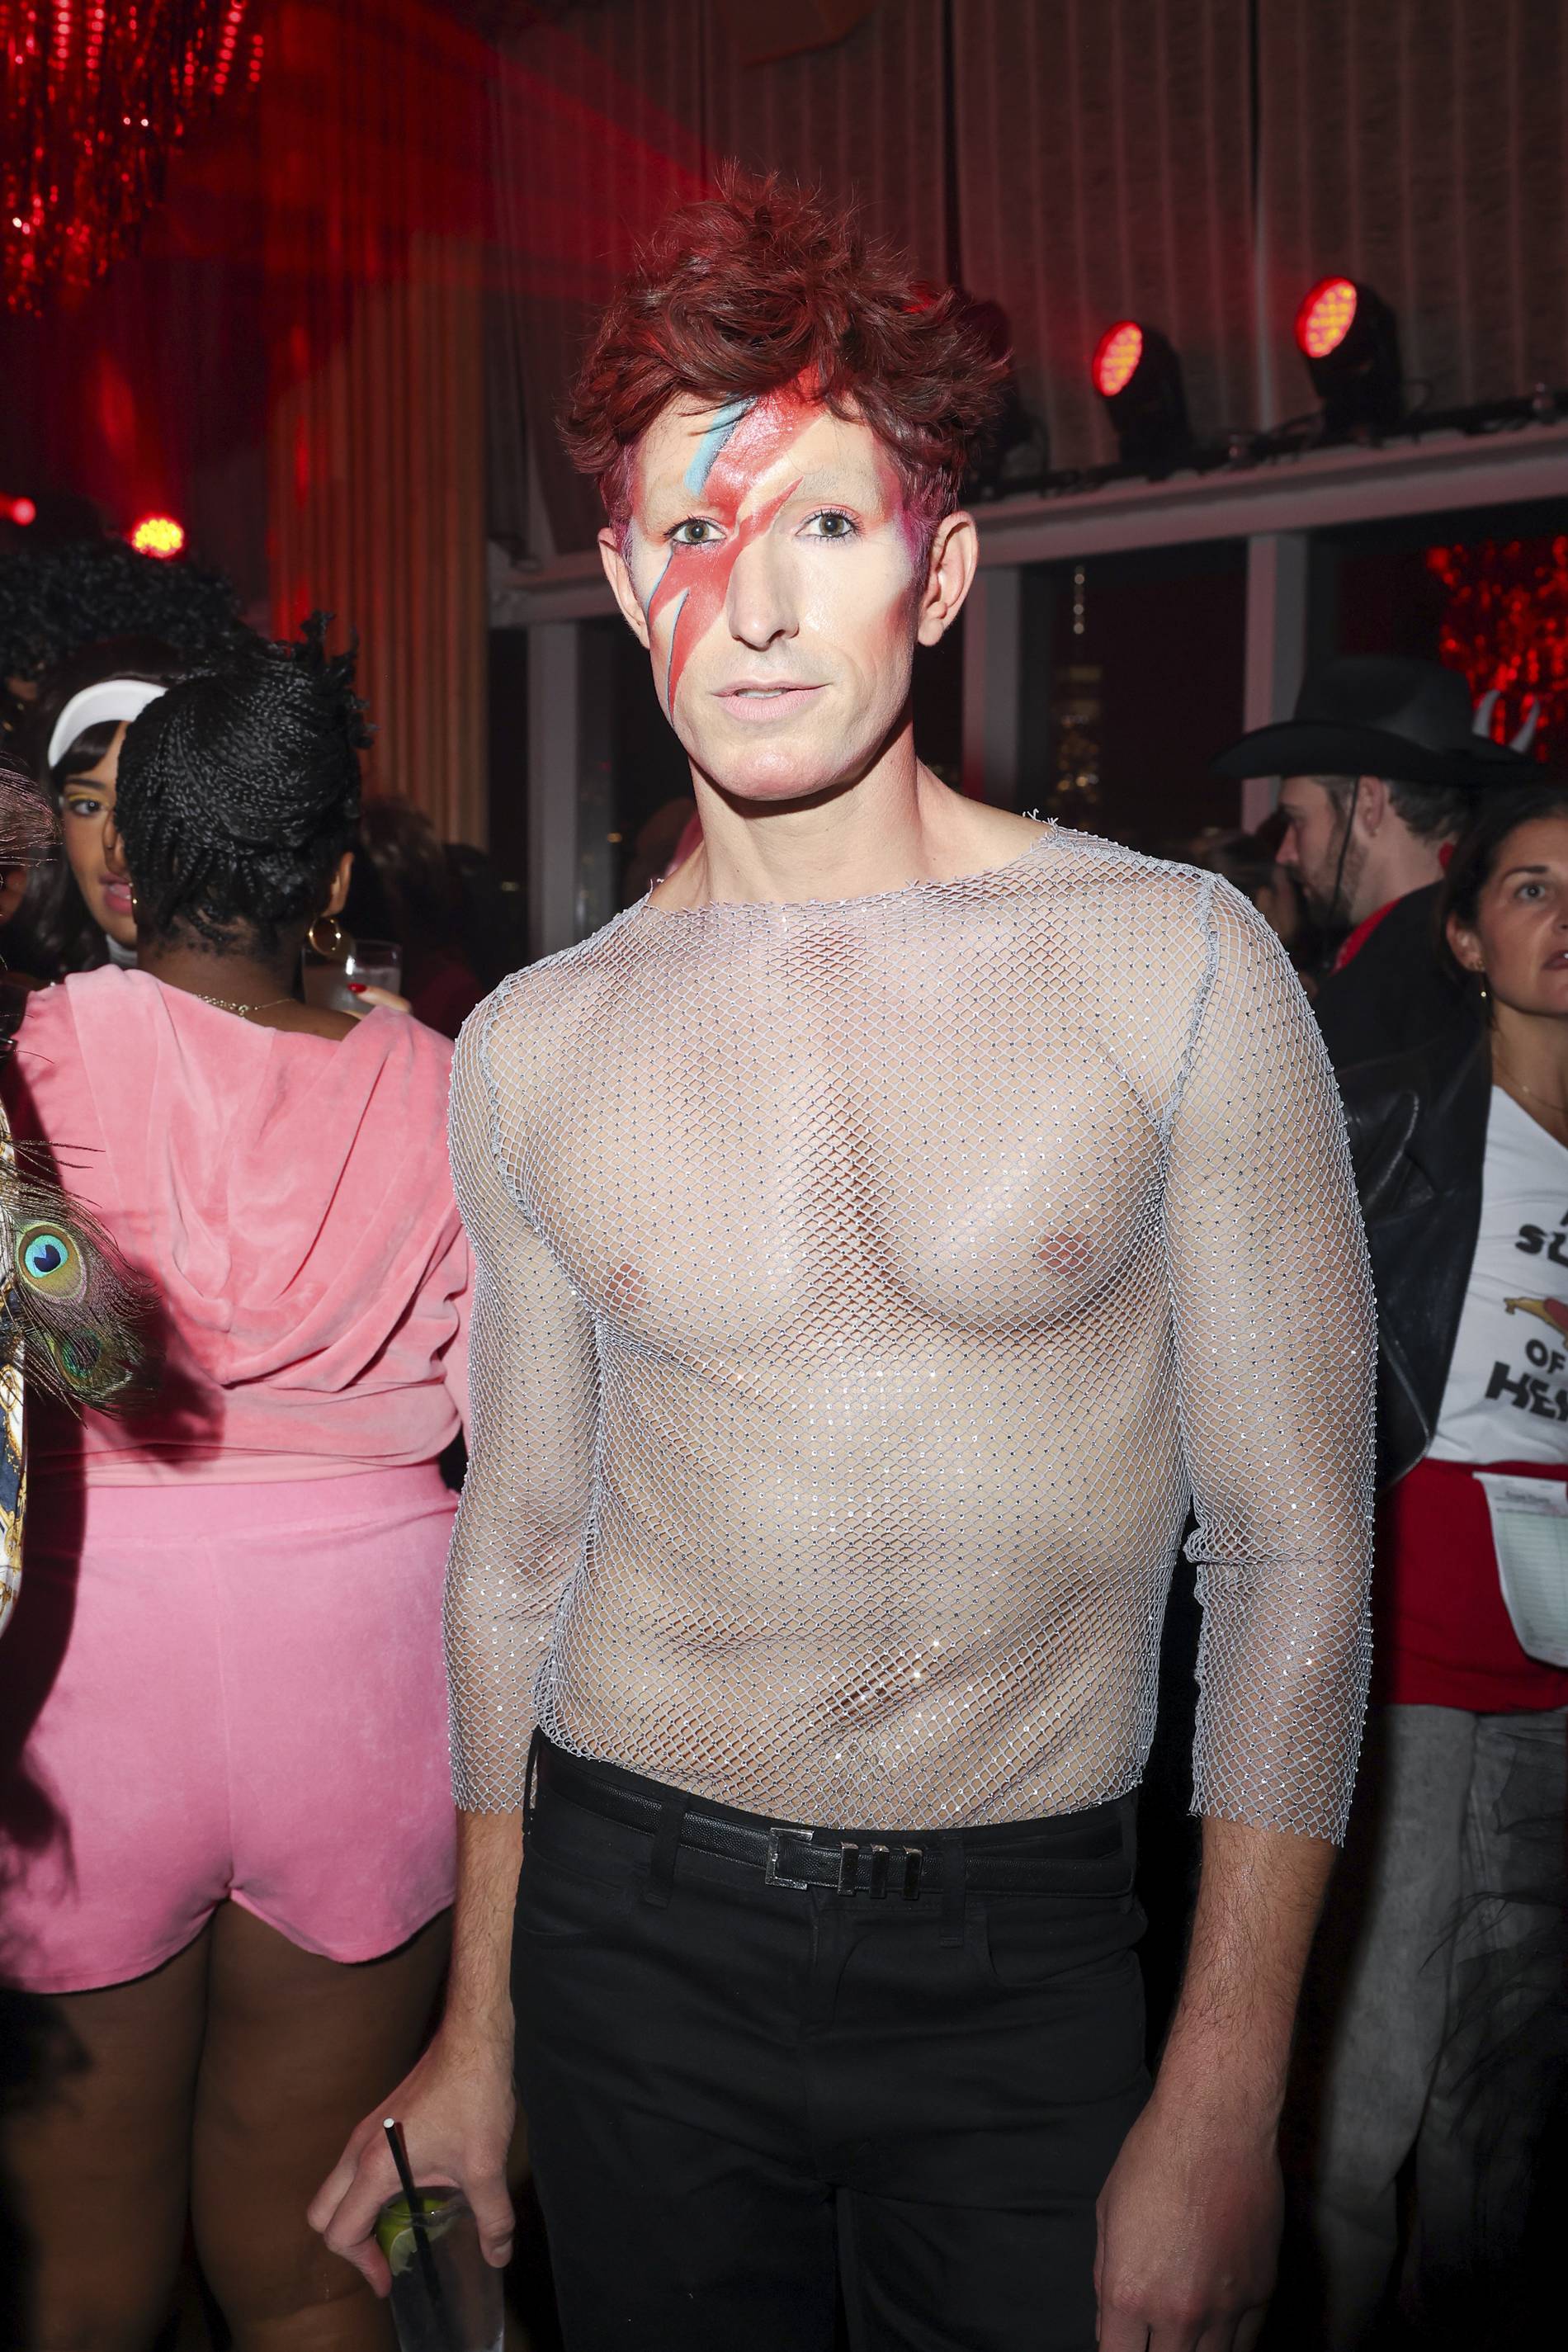 David Theilebeule in costume at the standard halloween party 2022